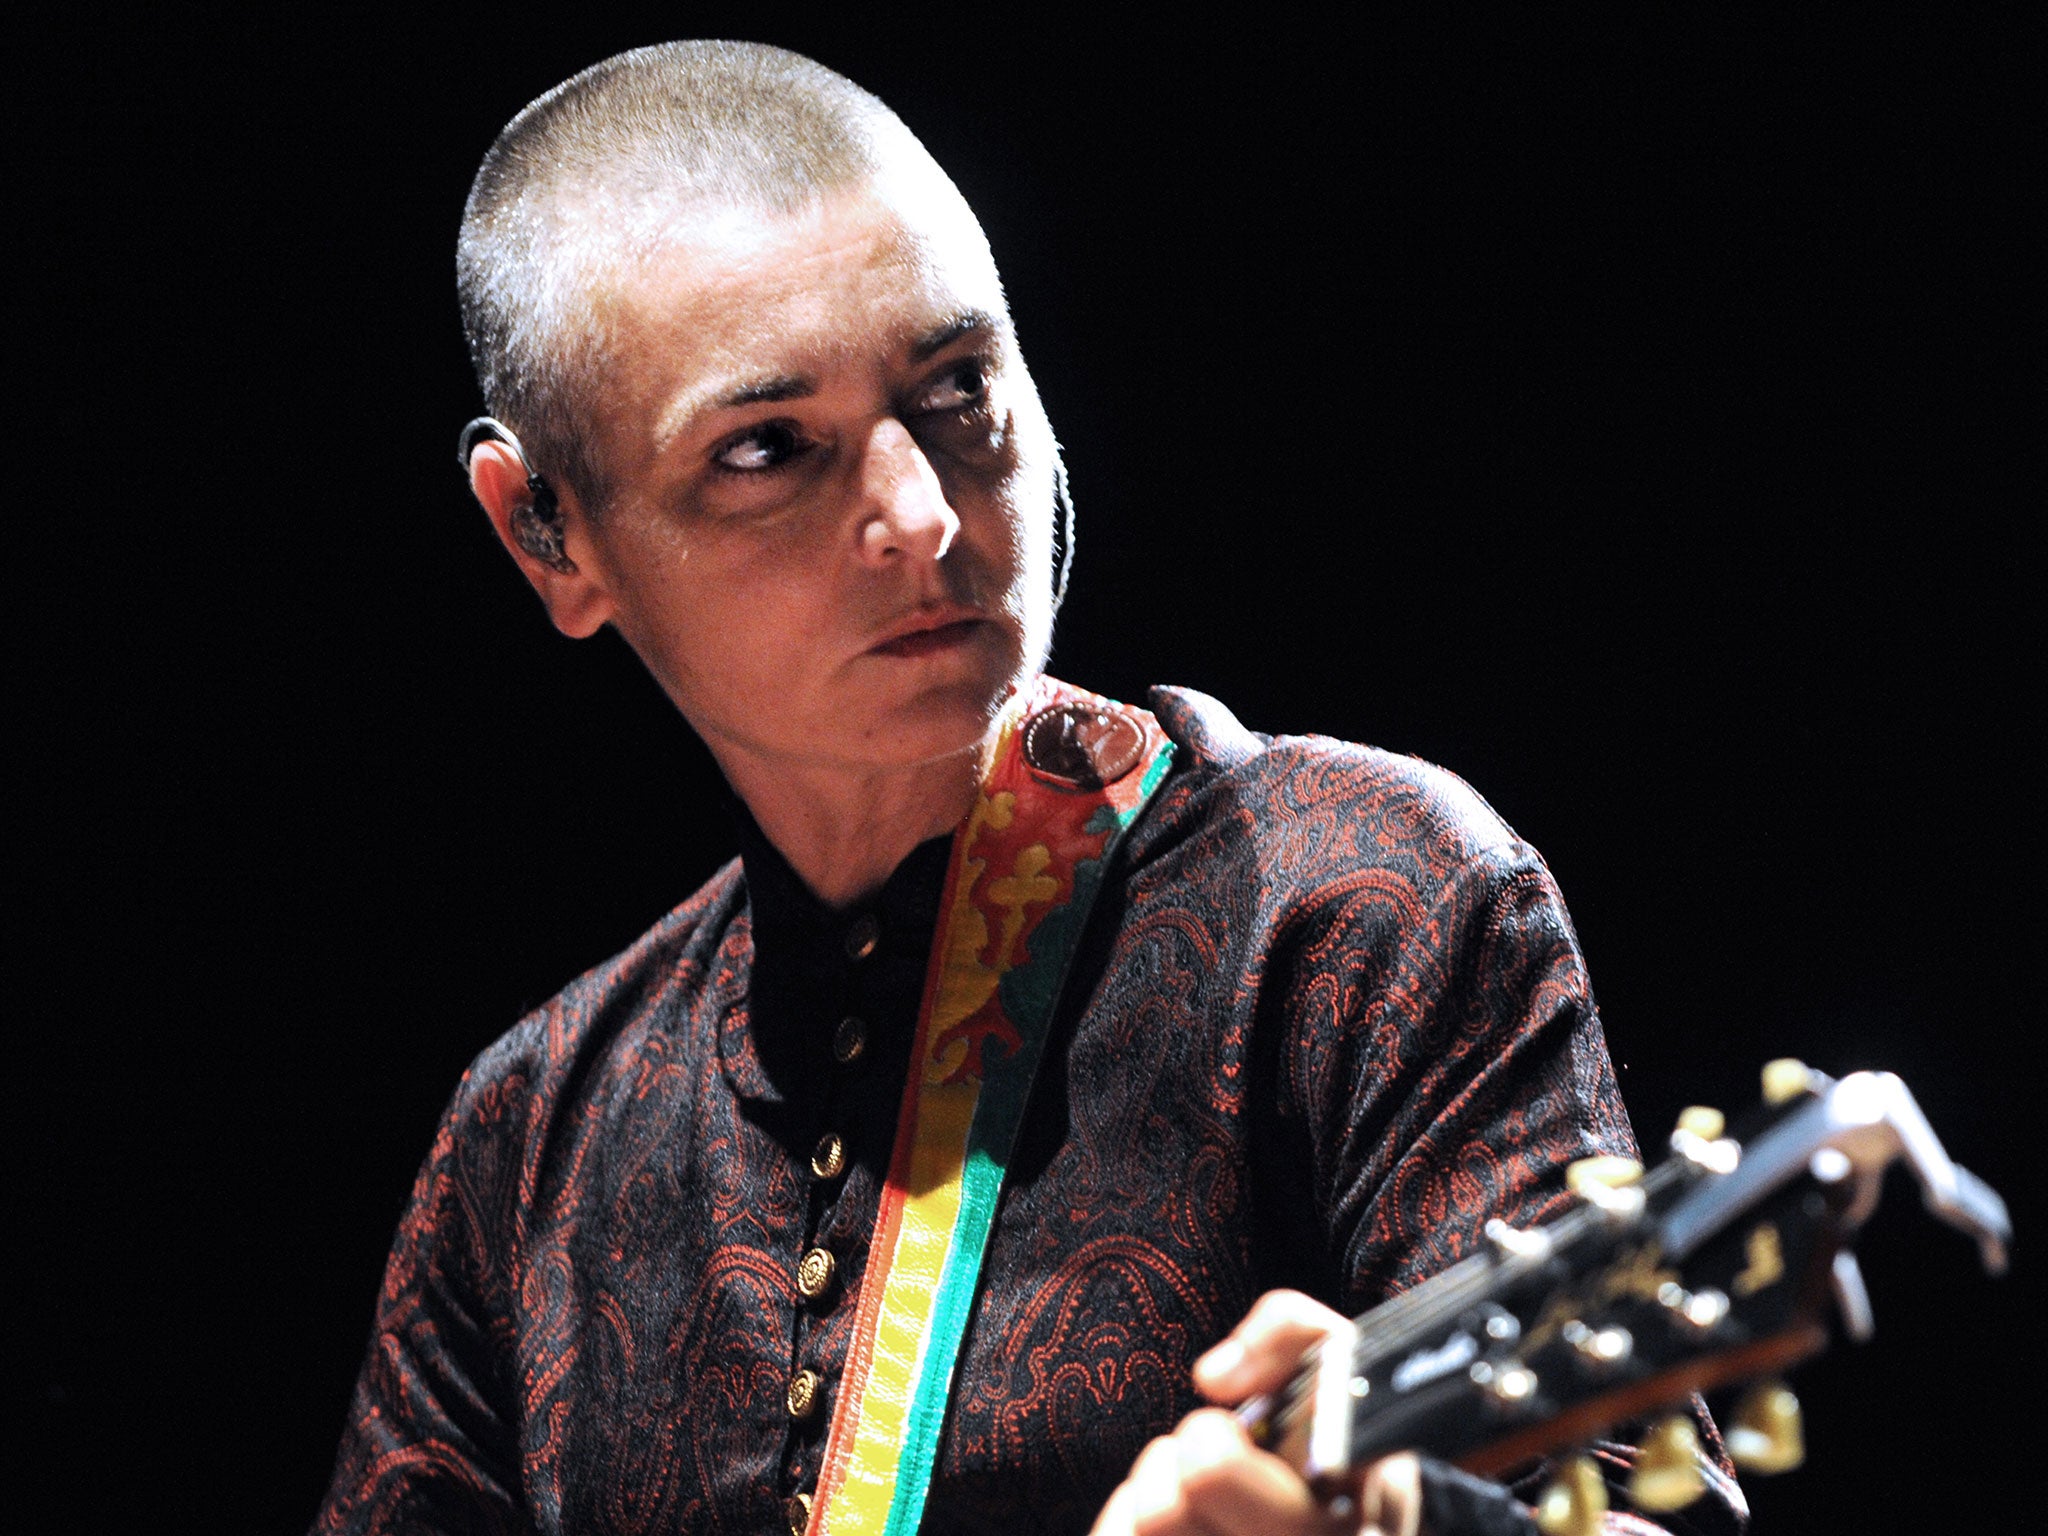 Sinead O'Connor posted a concerning message on her Facebook page